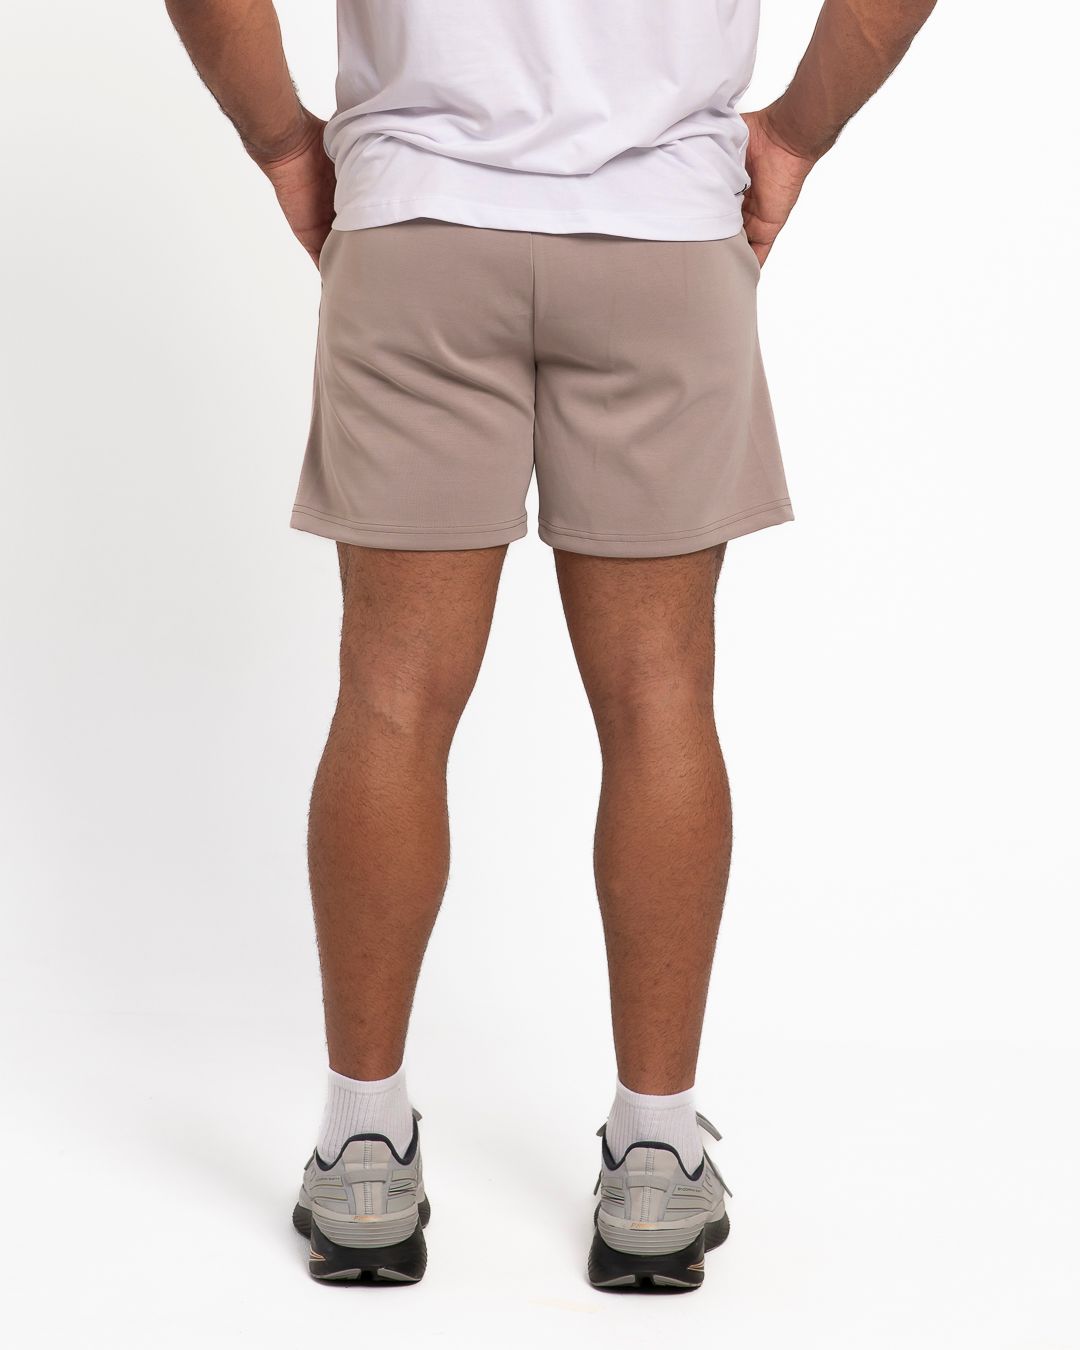 MEN'S On-The-Go Short (SoftMotion Fabric) - The Sydney Adams Collection